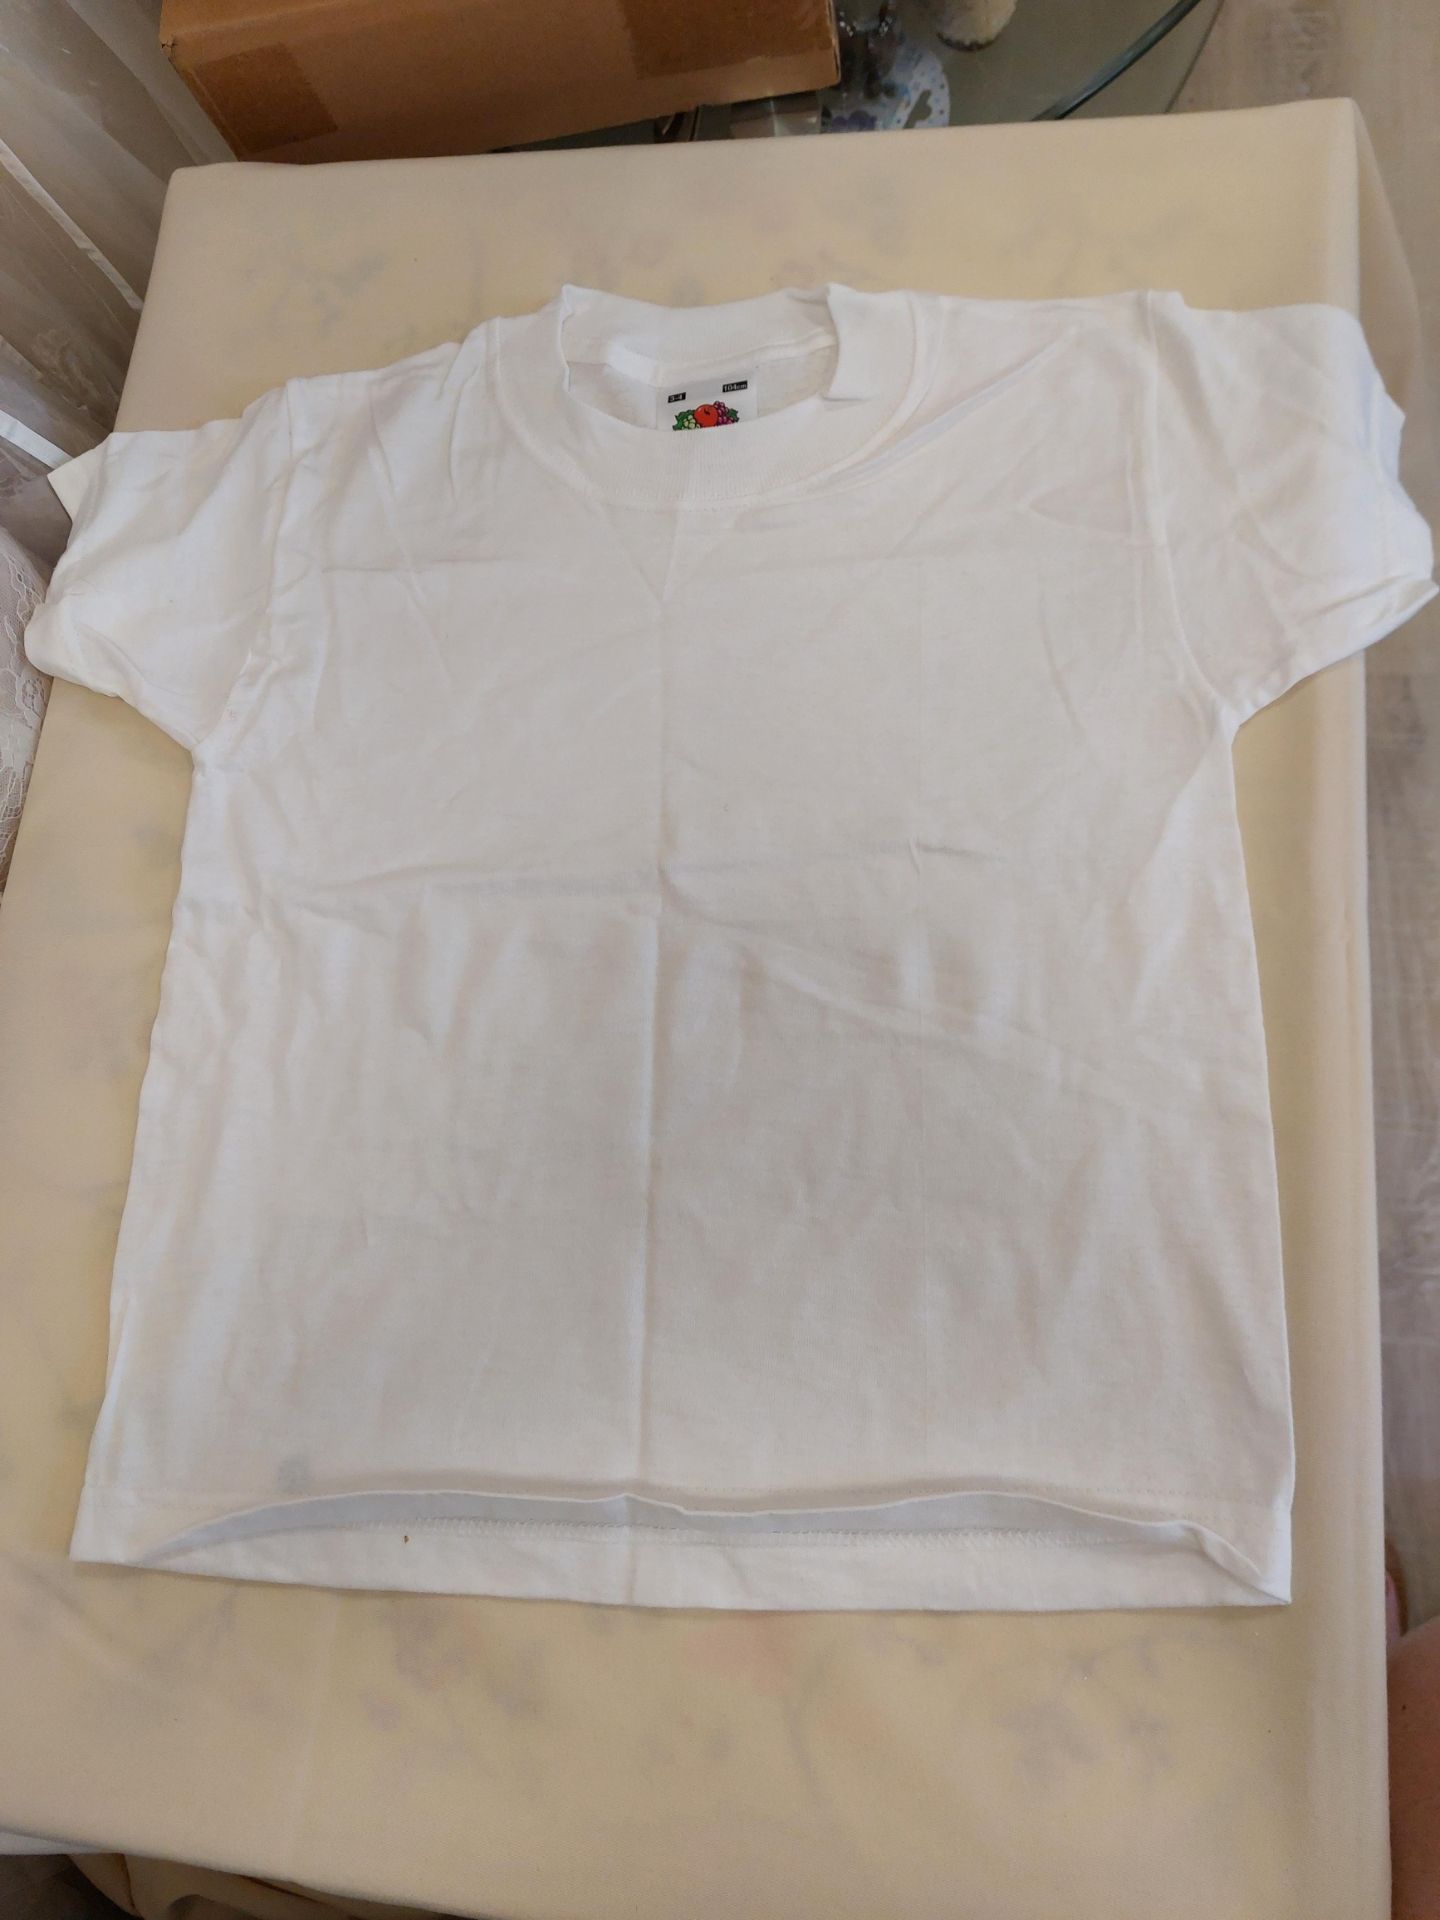 Pack of 6 White T-Shirts - Image 6 of 6